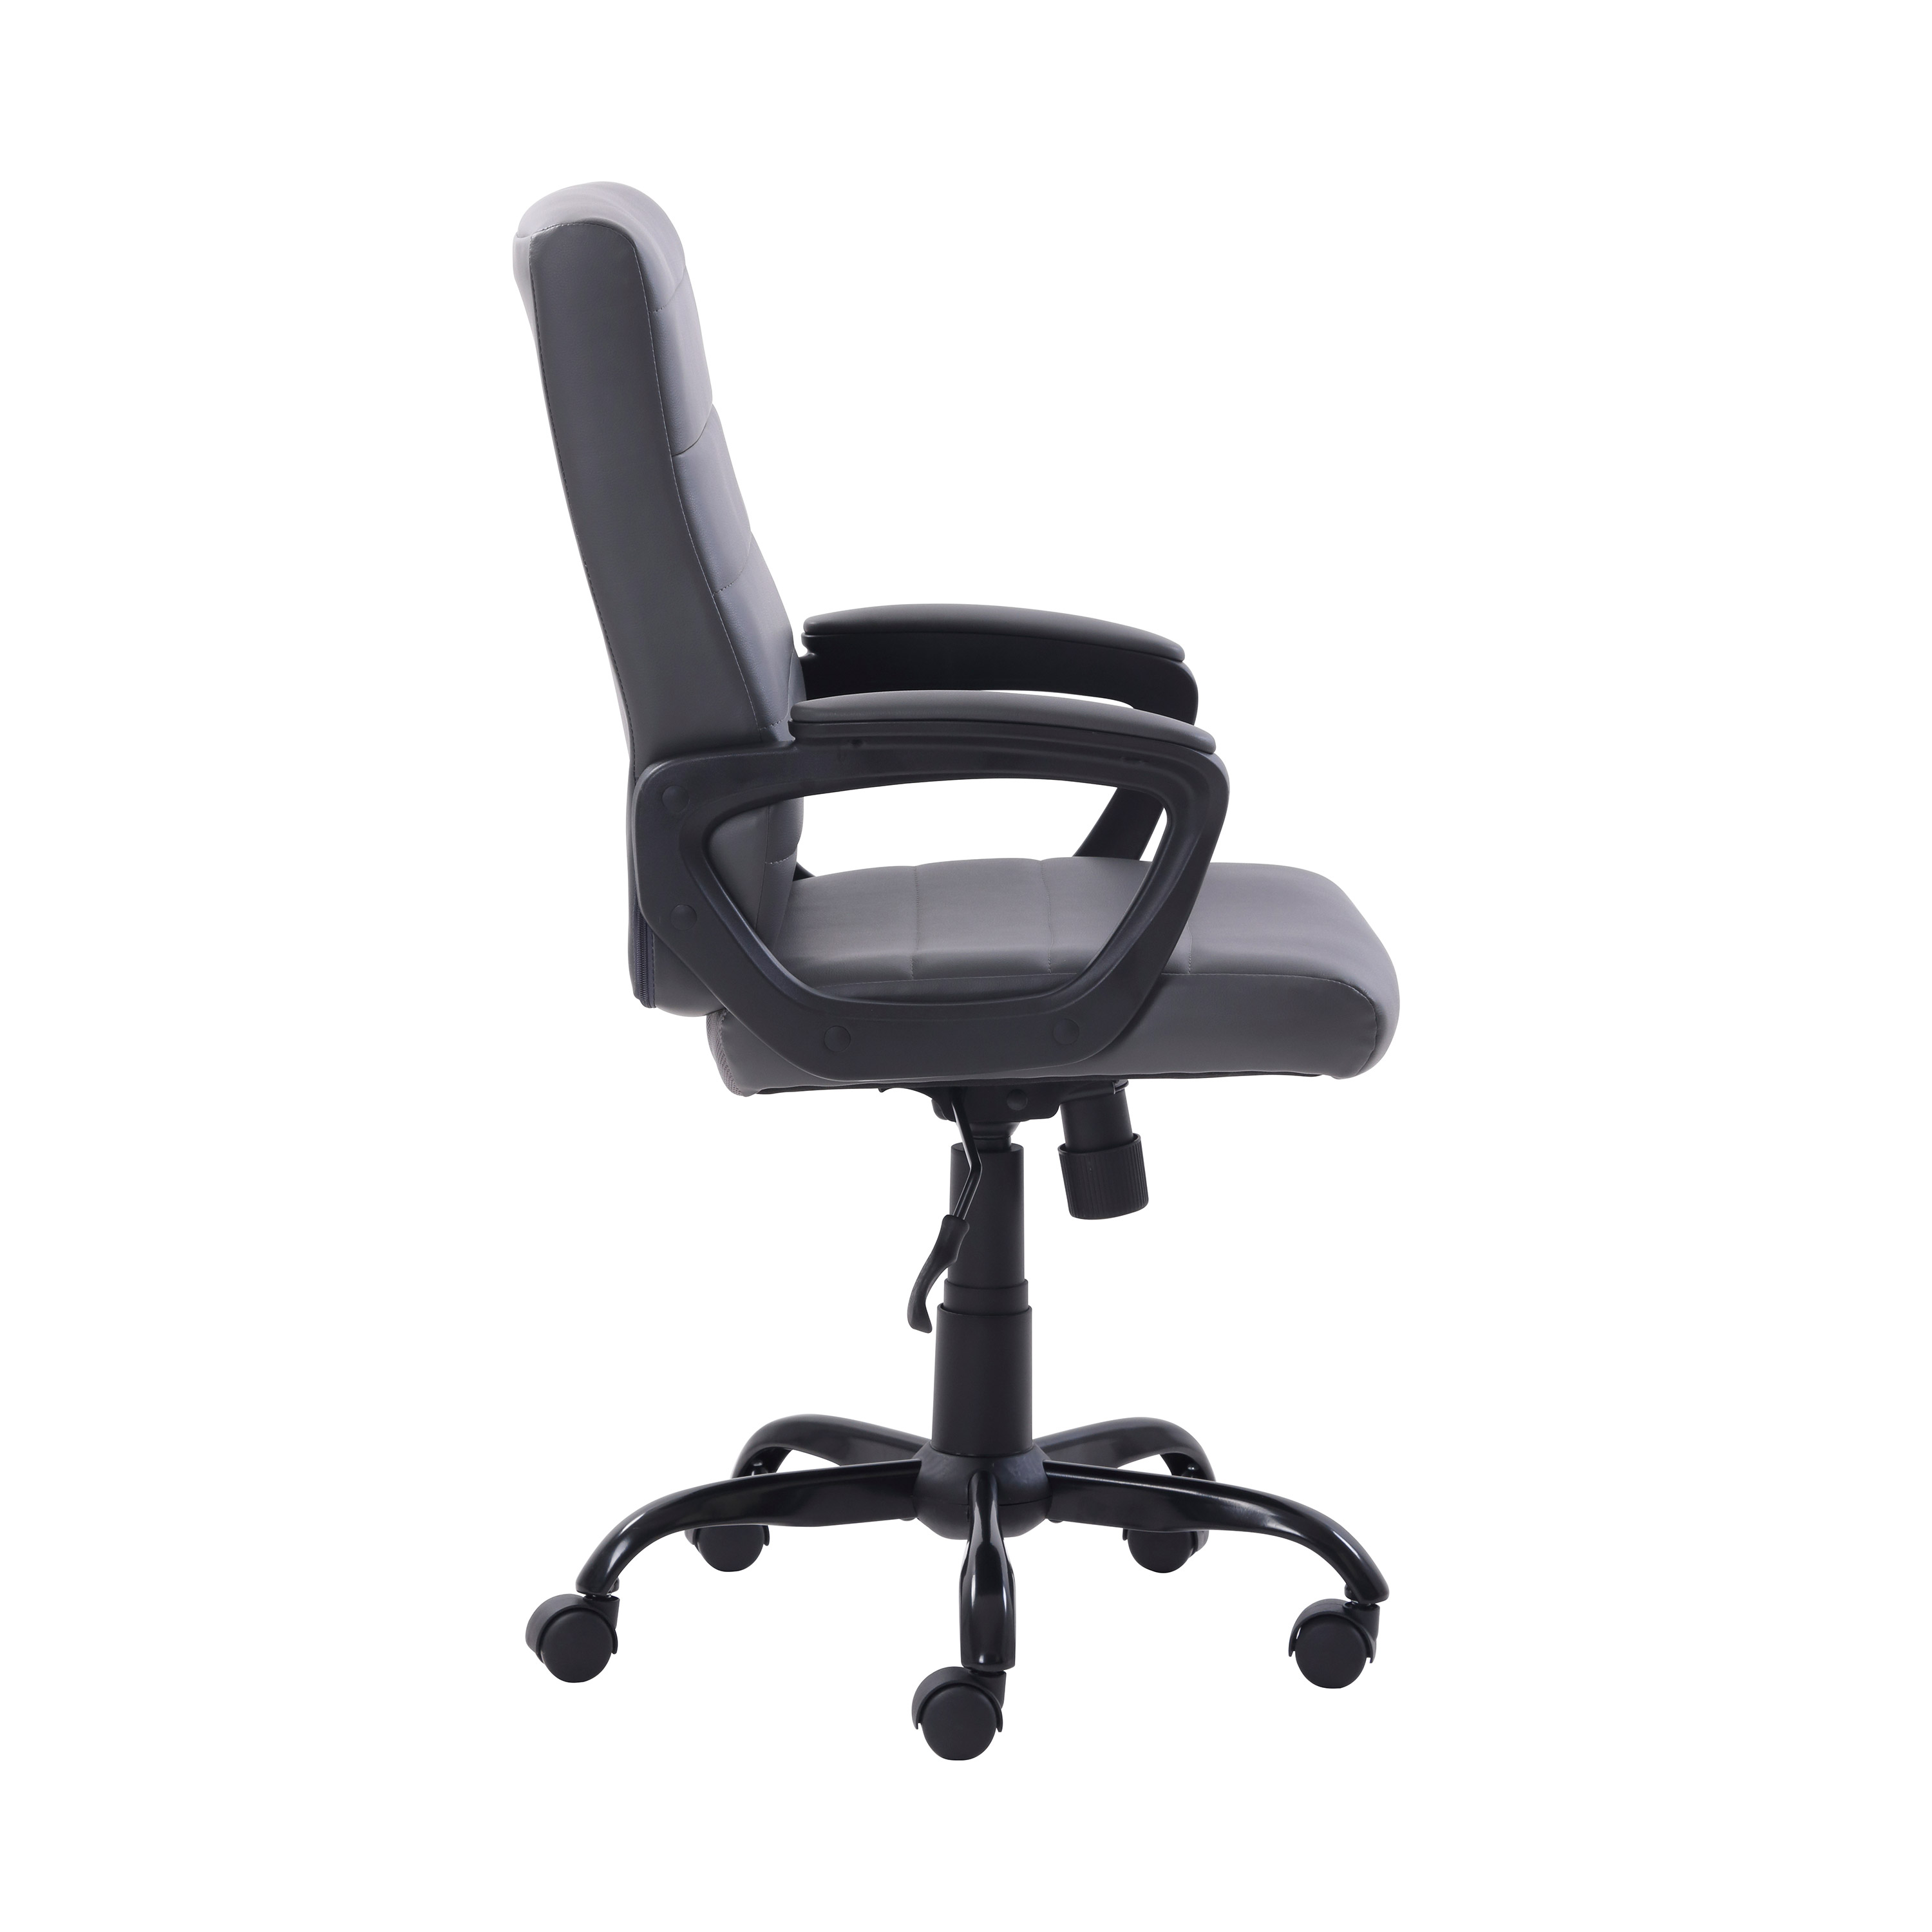 Mainstays Bonded Leather Mid-Back Manager's Office Chair, Gray - image 9 of 11